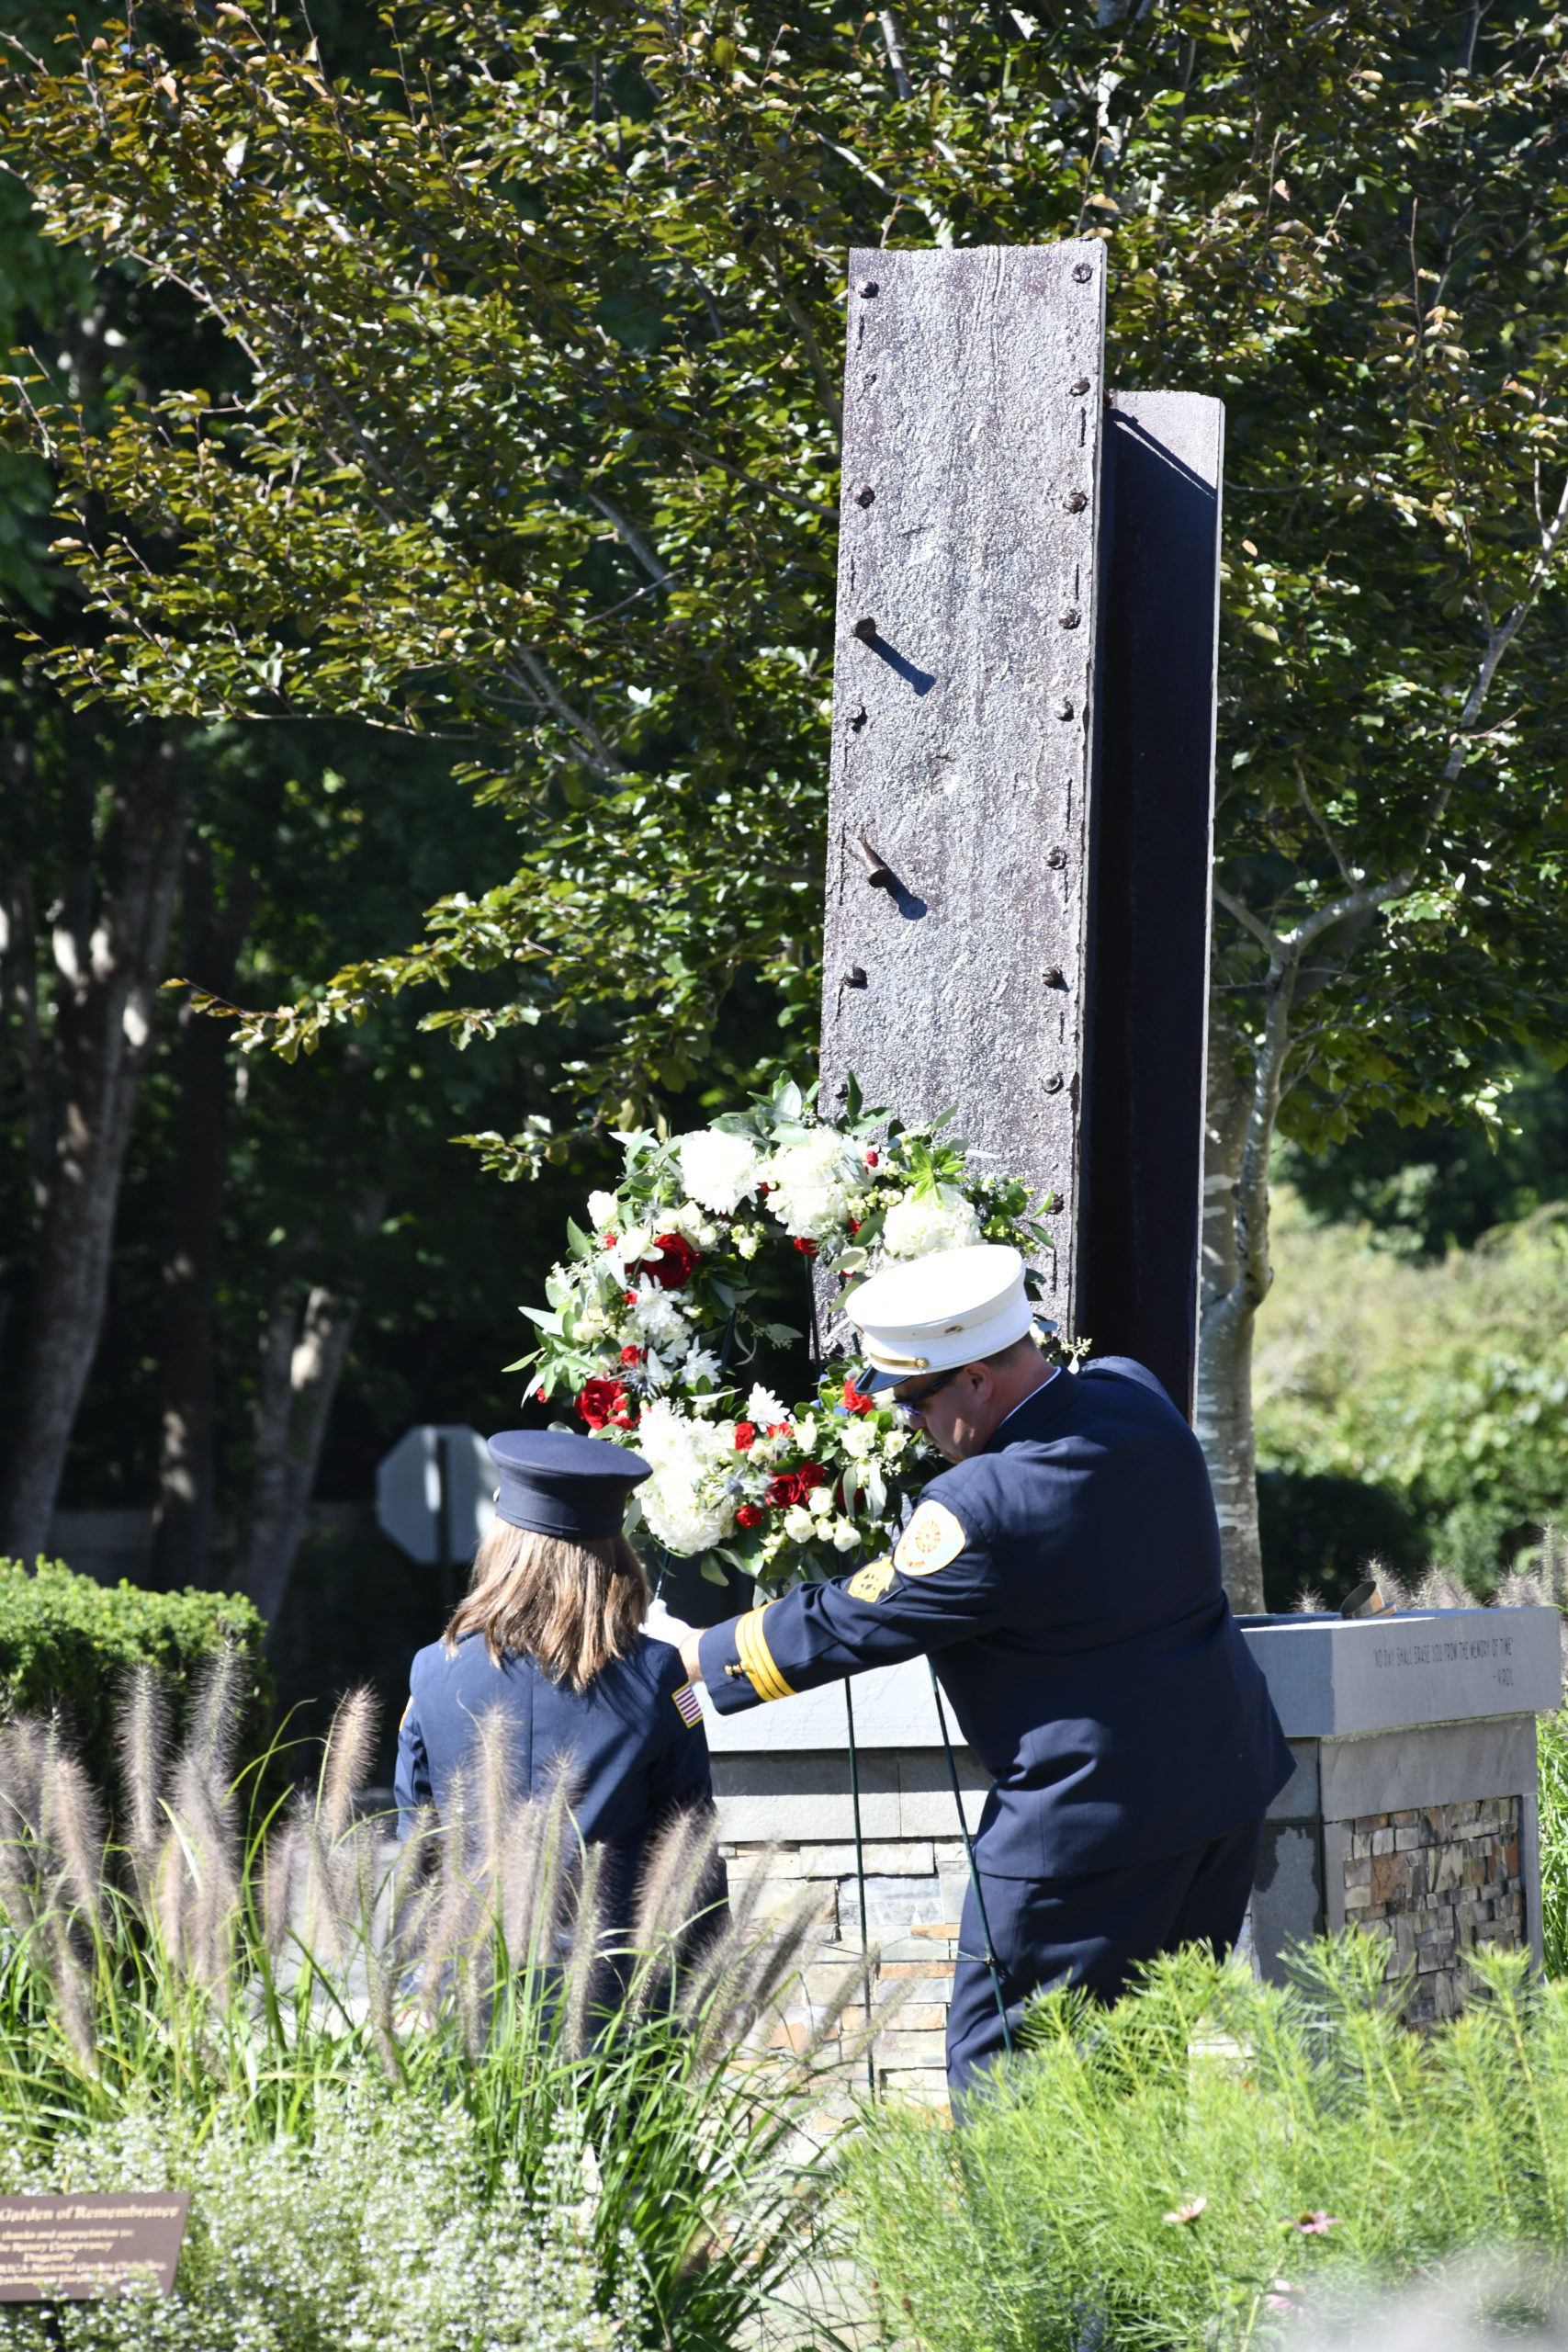 The wreath is laid at the rededication of the Quogue 9/11 Memorial on Saturday.